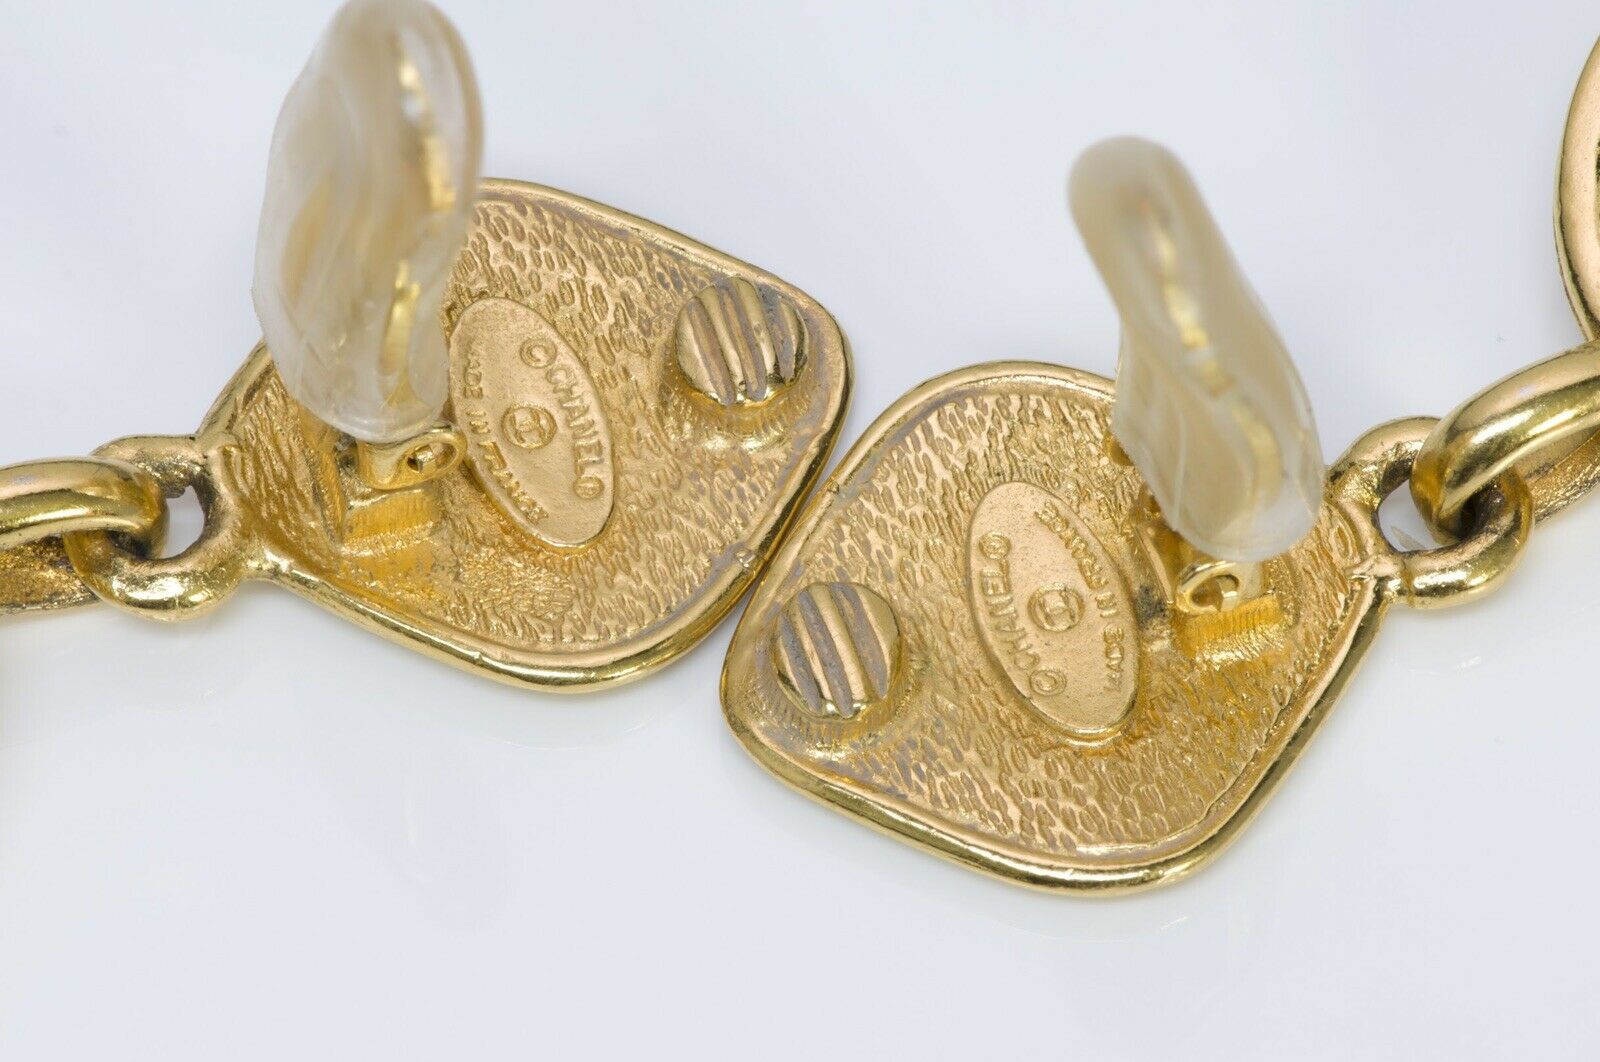 Vintage CHANEL CC 1980’s Quilted Drop Earrings